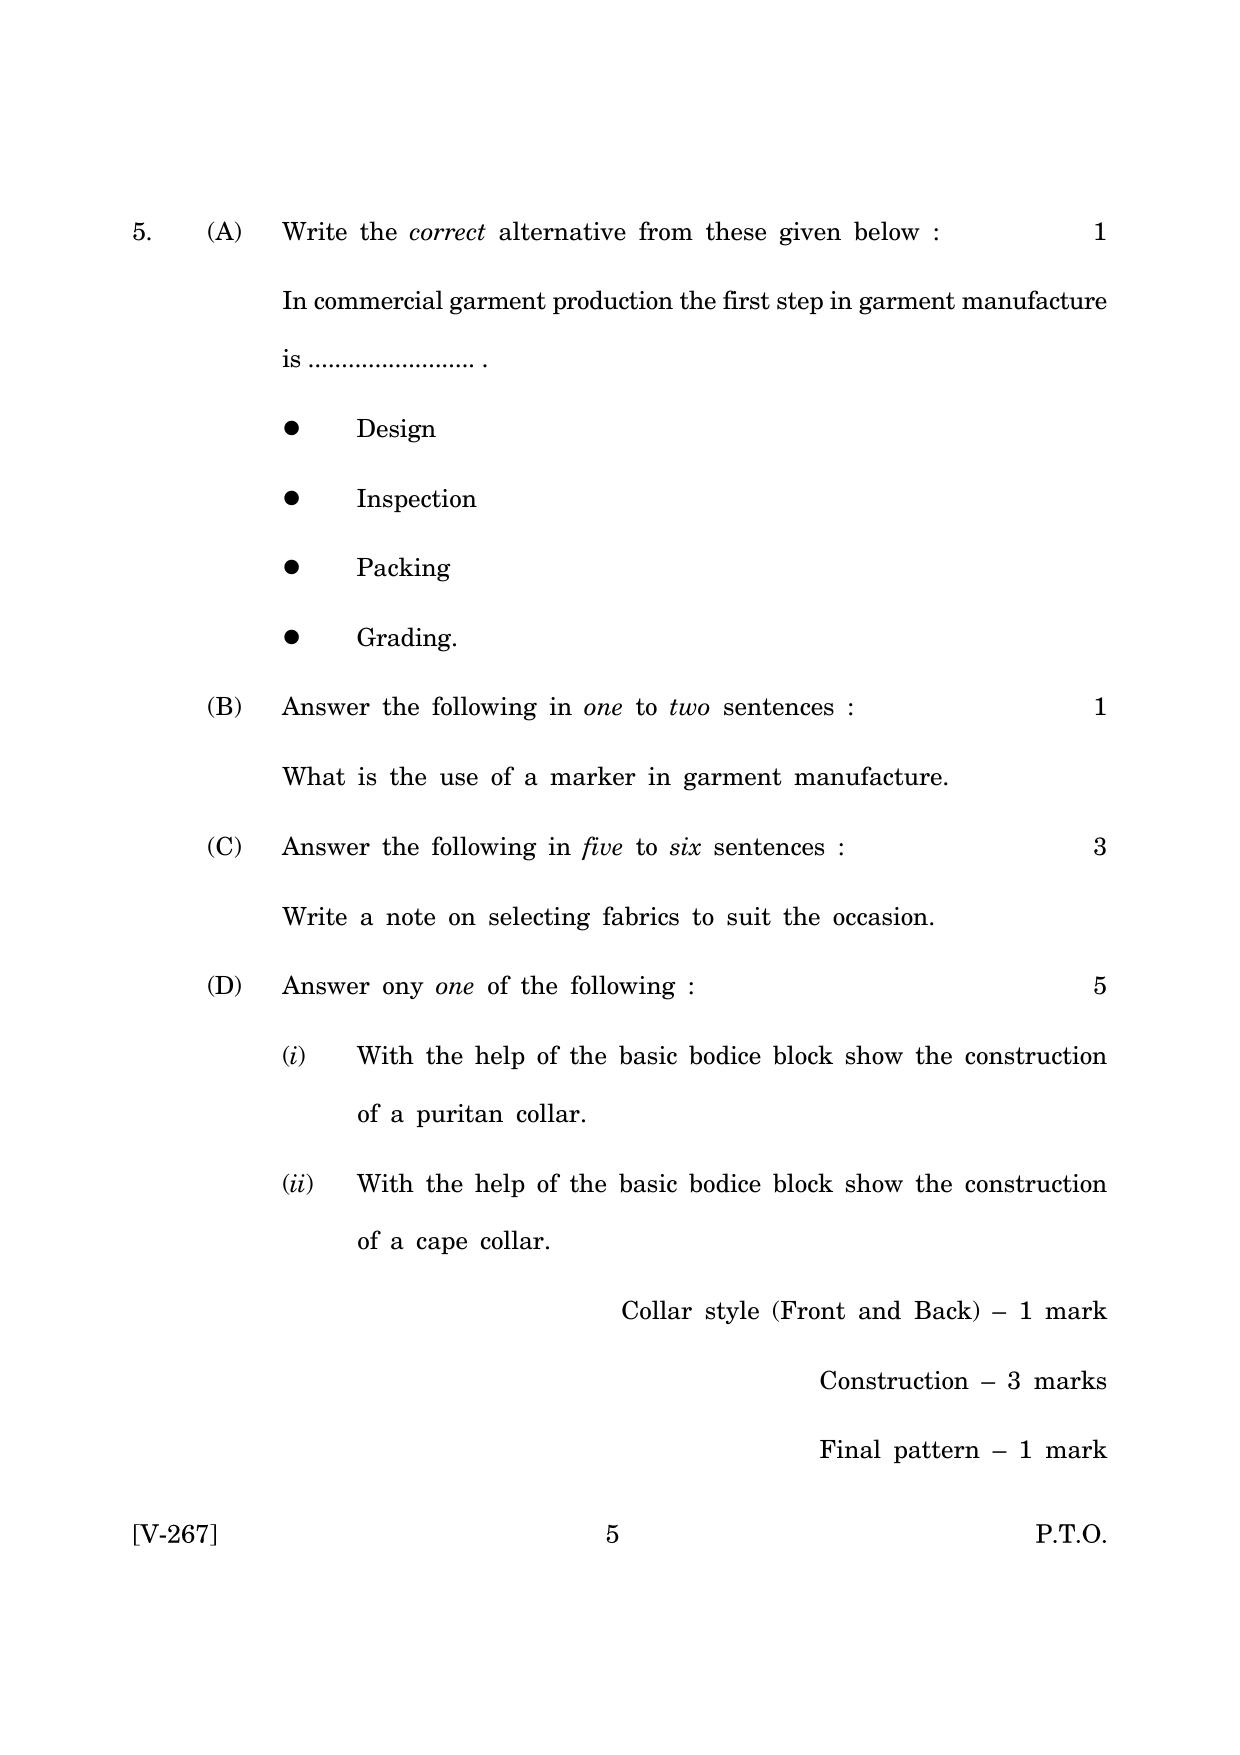 Goa Board Class 12 Clothing Construction   (March 2019) Question Paper - Page 5